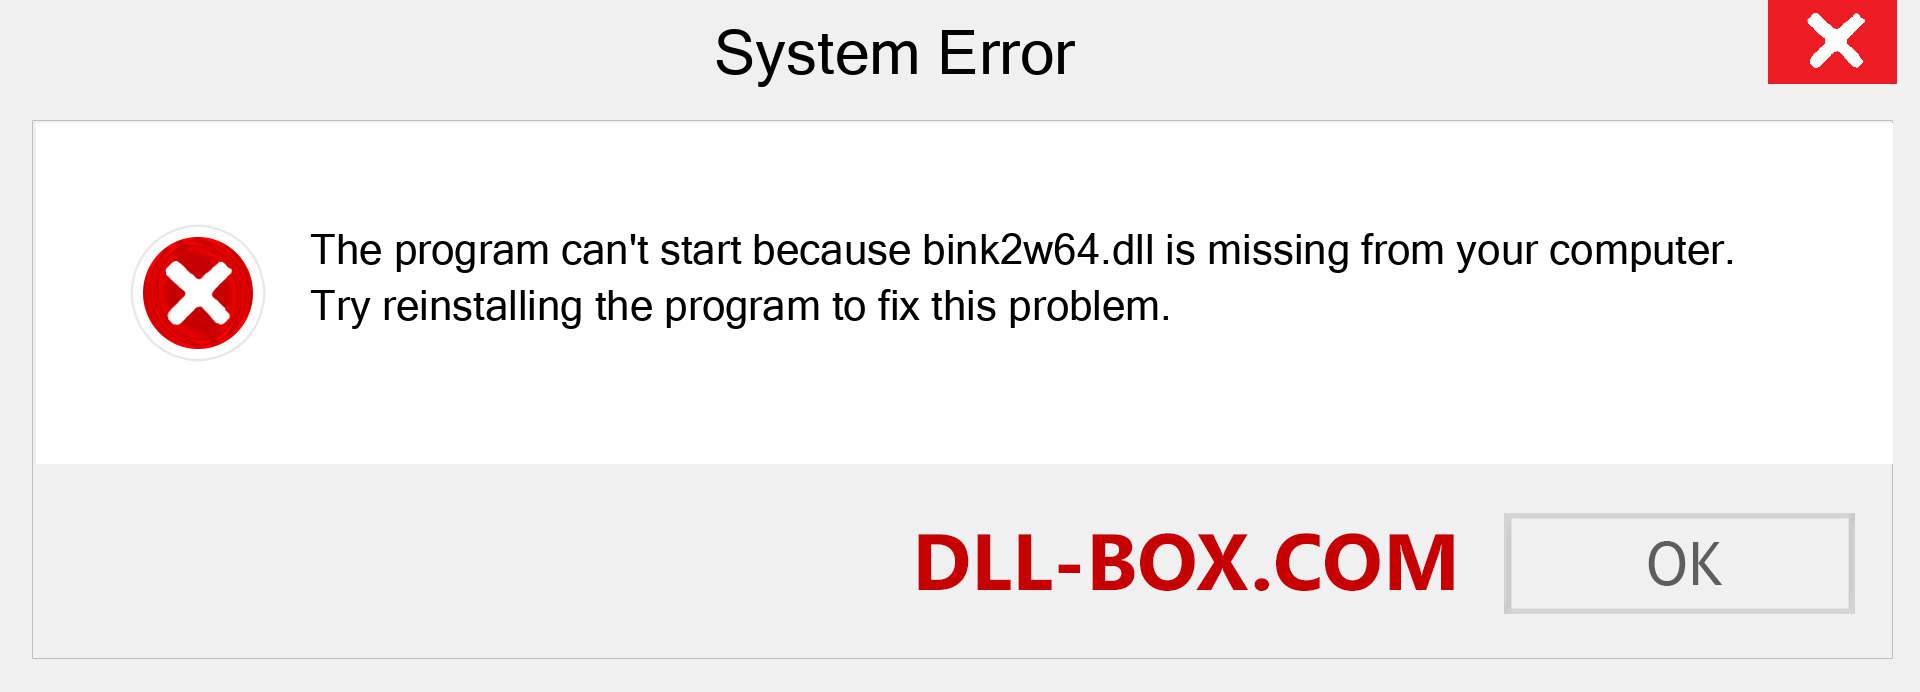  bink2w64.dll file is missing?. Download for Windows 7, 8, 10 - Fix  bink2w64 dll Missing Error on Windows, photos, images